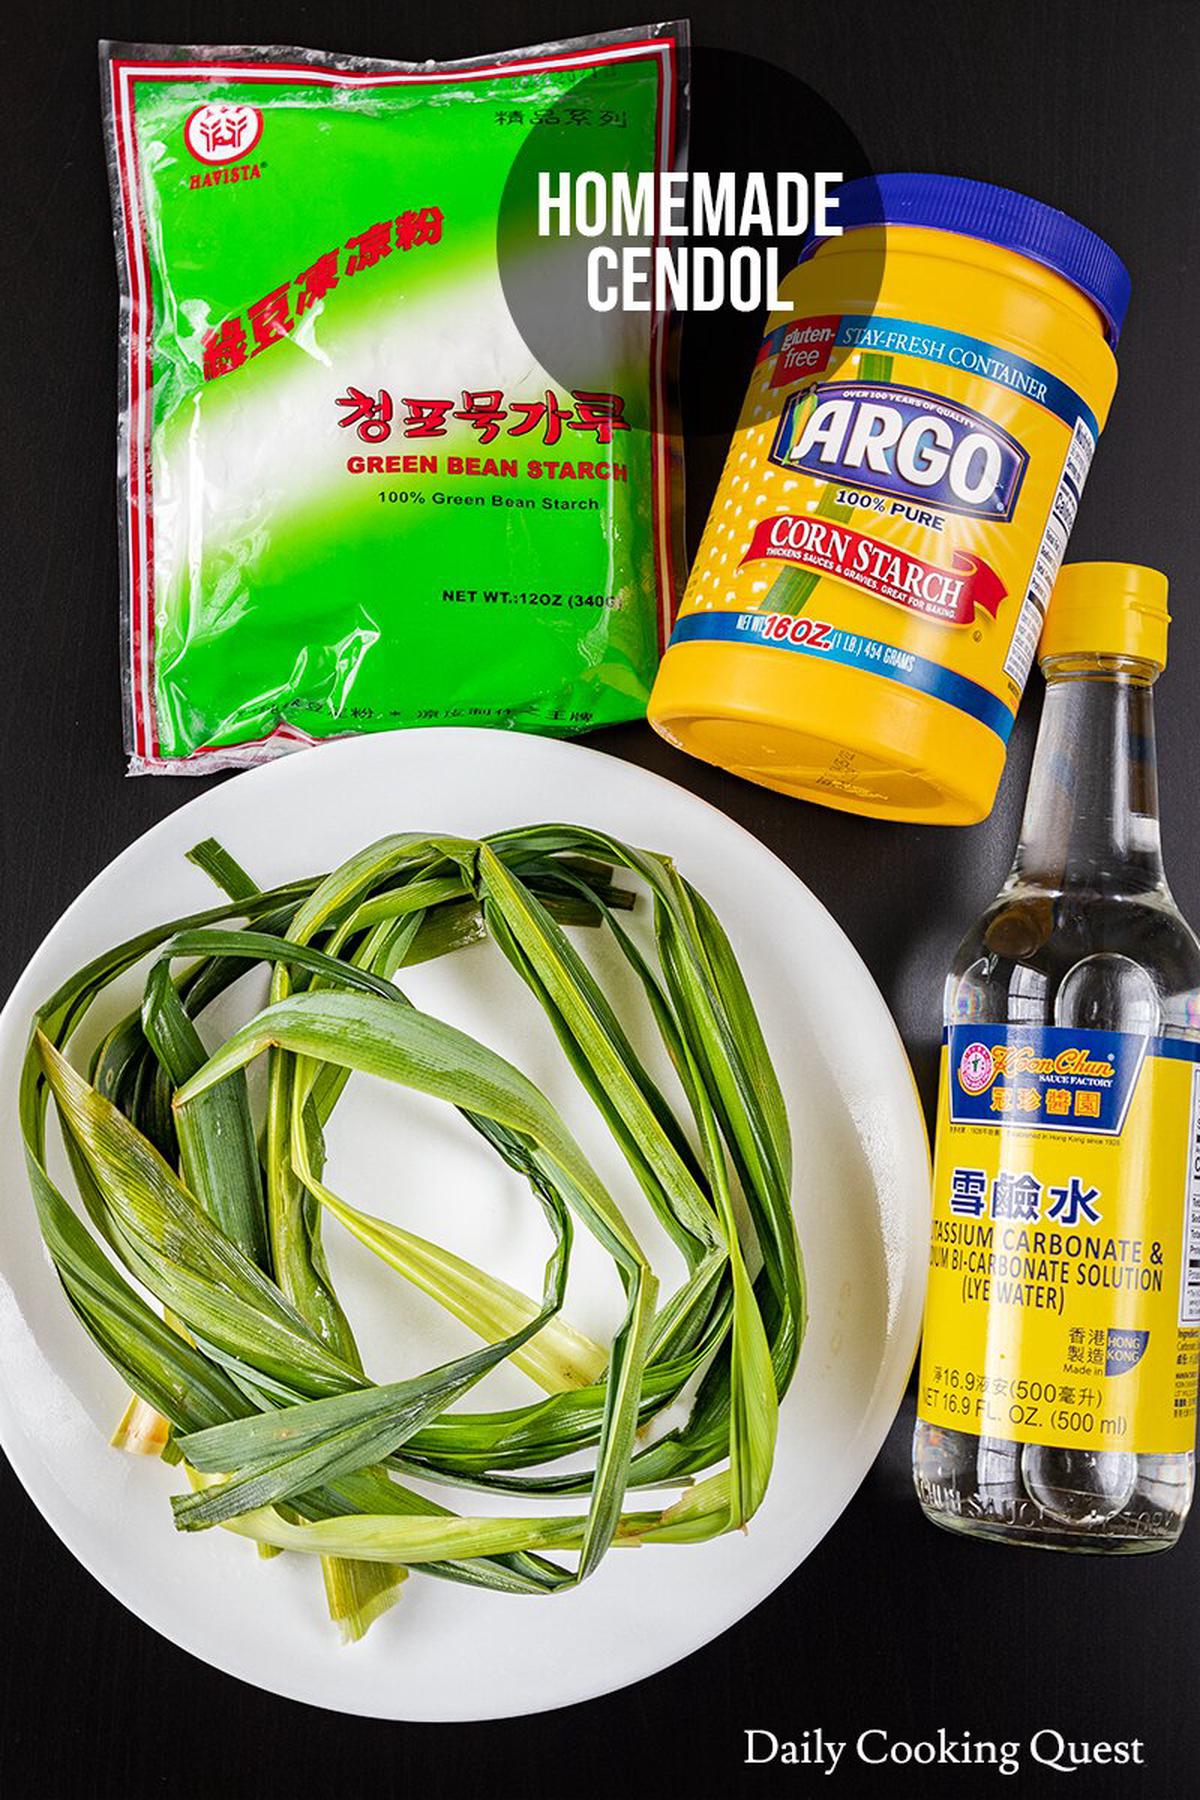 Ingredients for homemade cendol: pandan leaves, mung bean starch, cornstarch, and lye water.